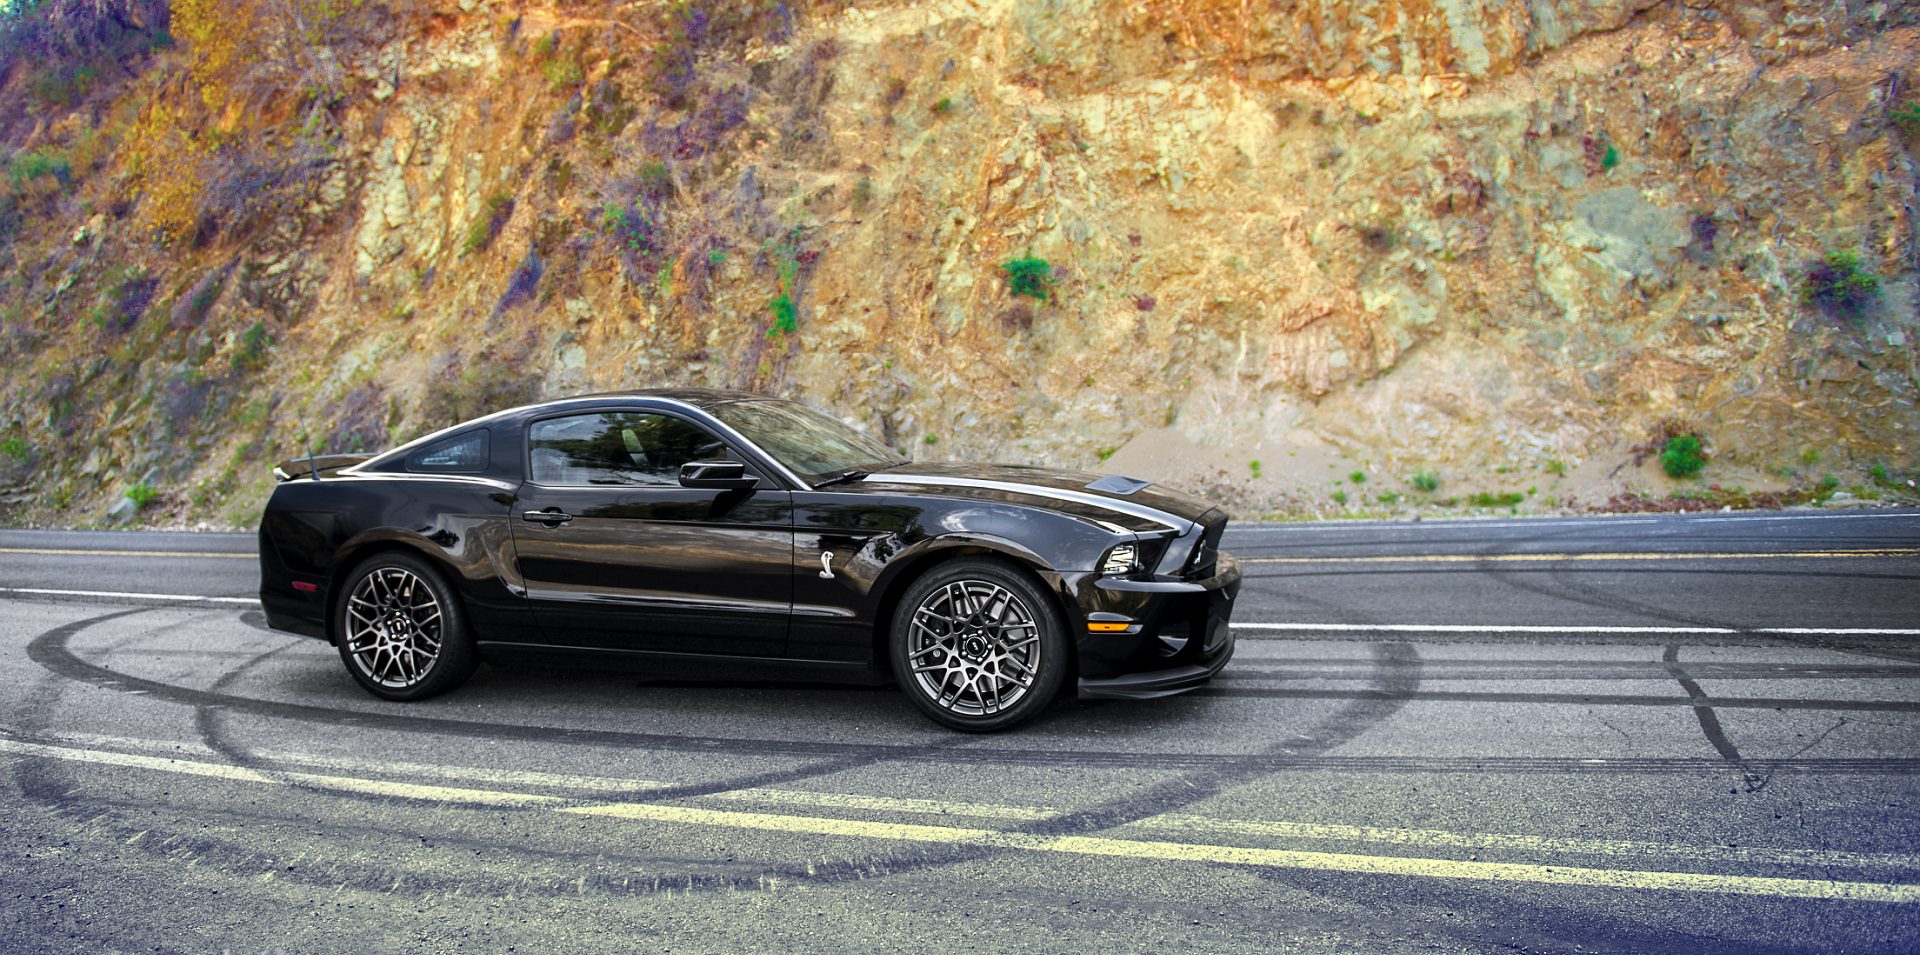 2014 Ford Mustang Shelby GT500 Wallpapers | MustangSpecs.com